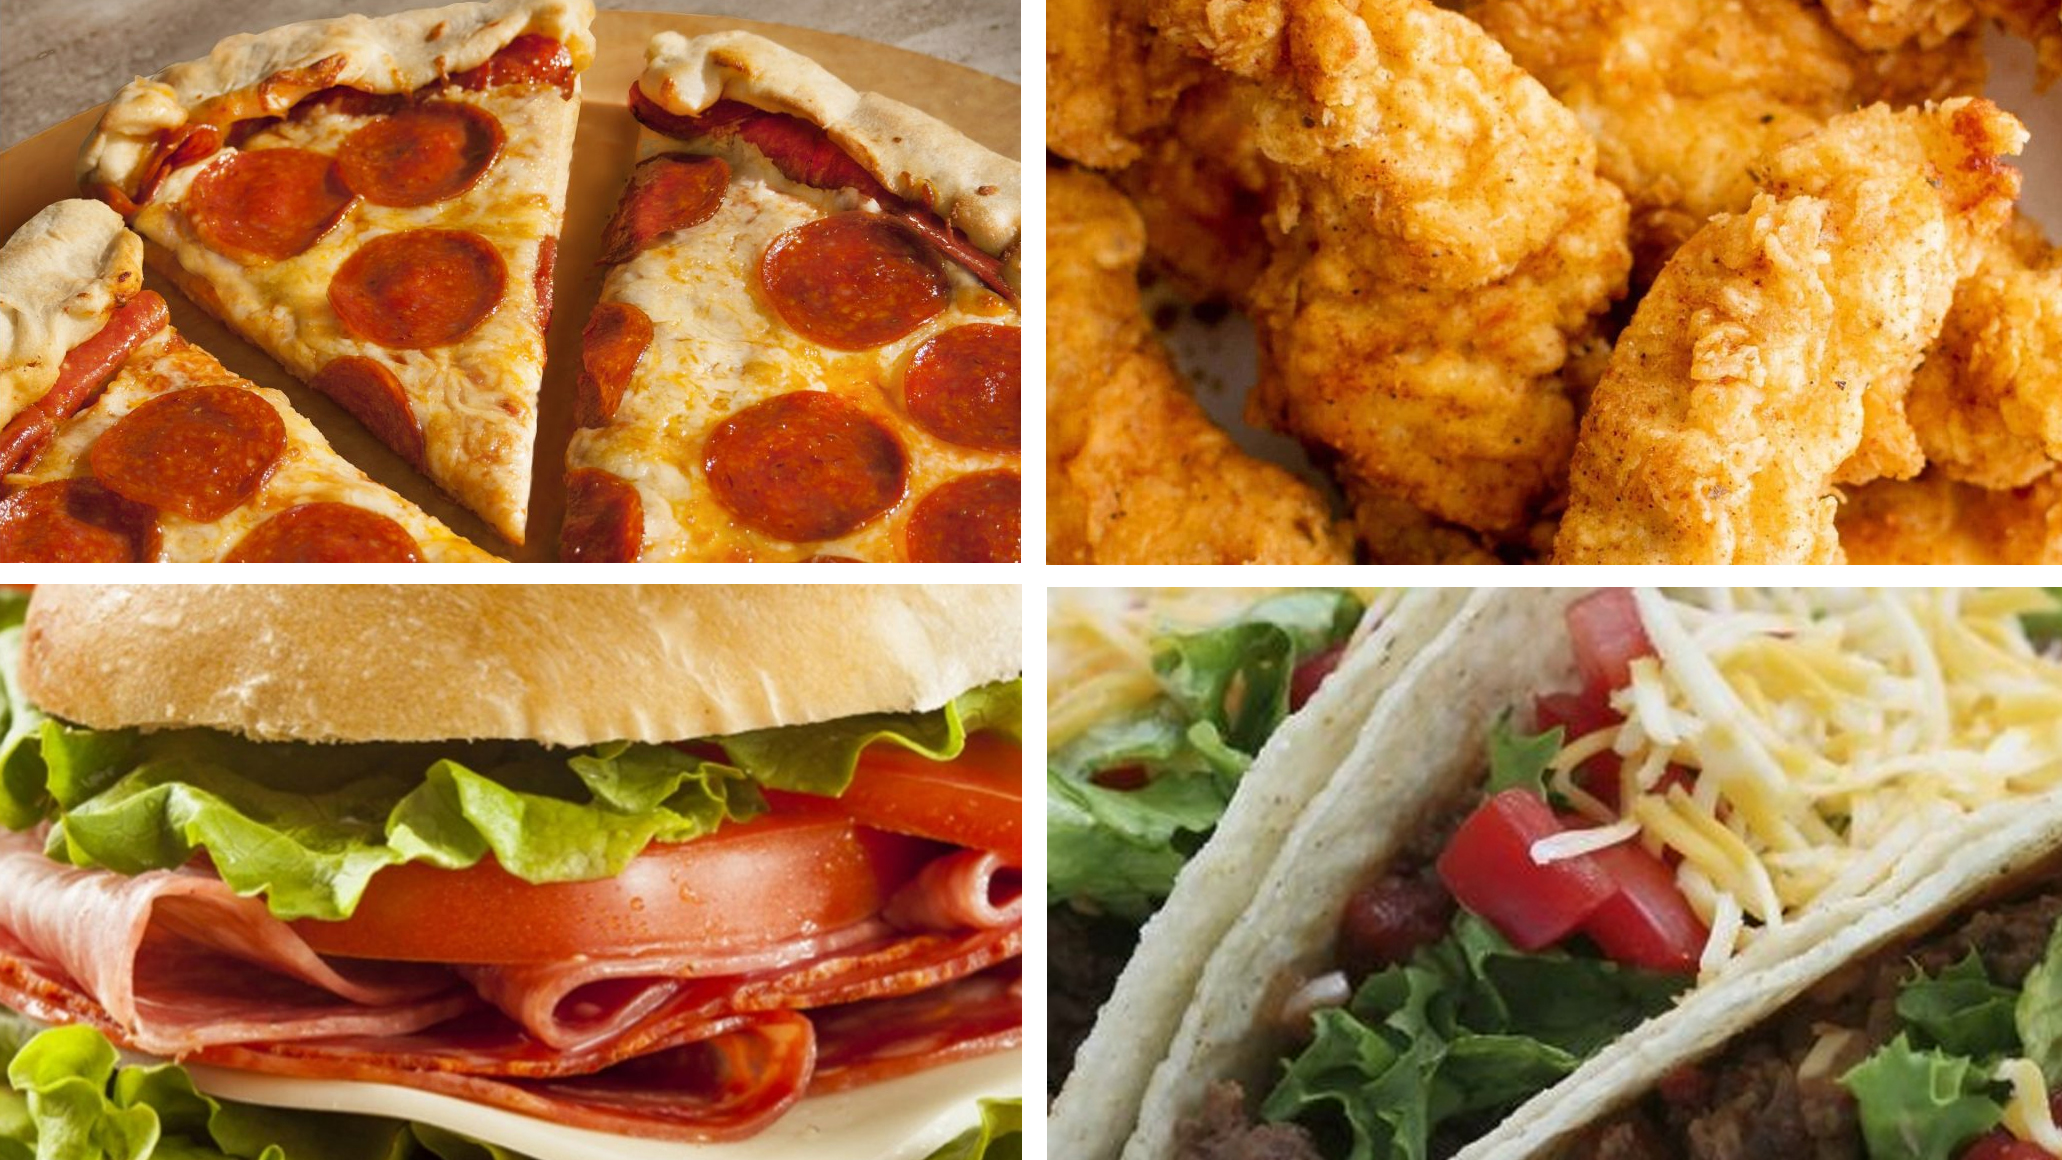 Picture shows pizza, chicken, sub sandwich, and tacos.